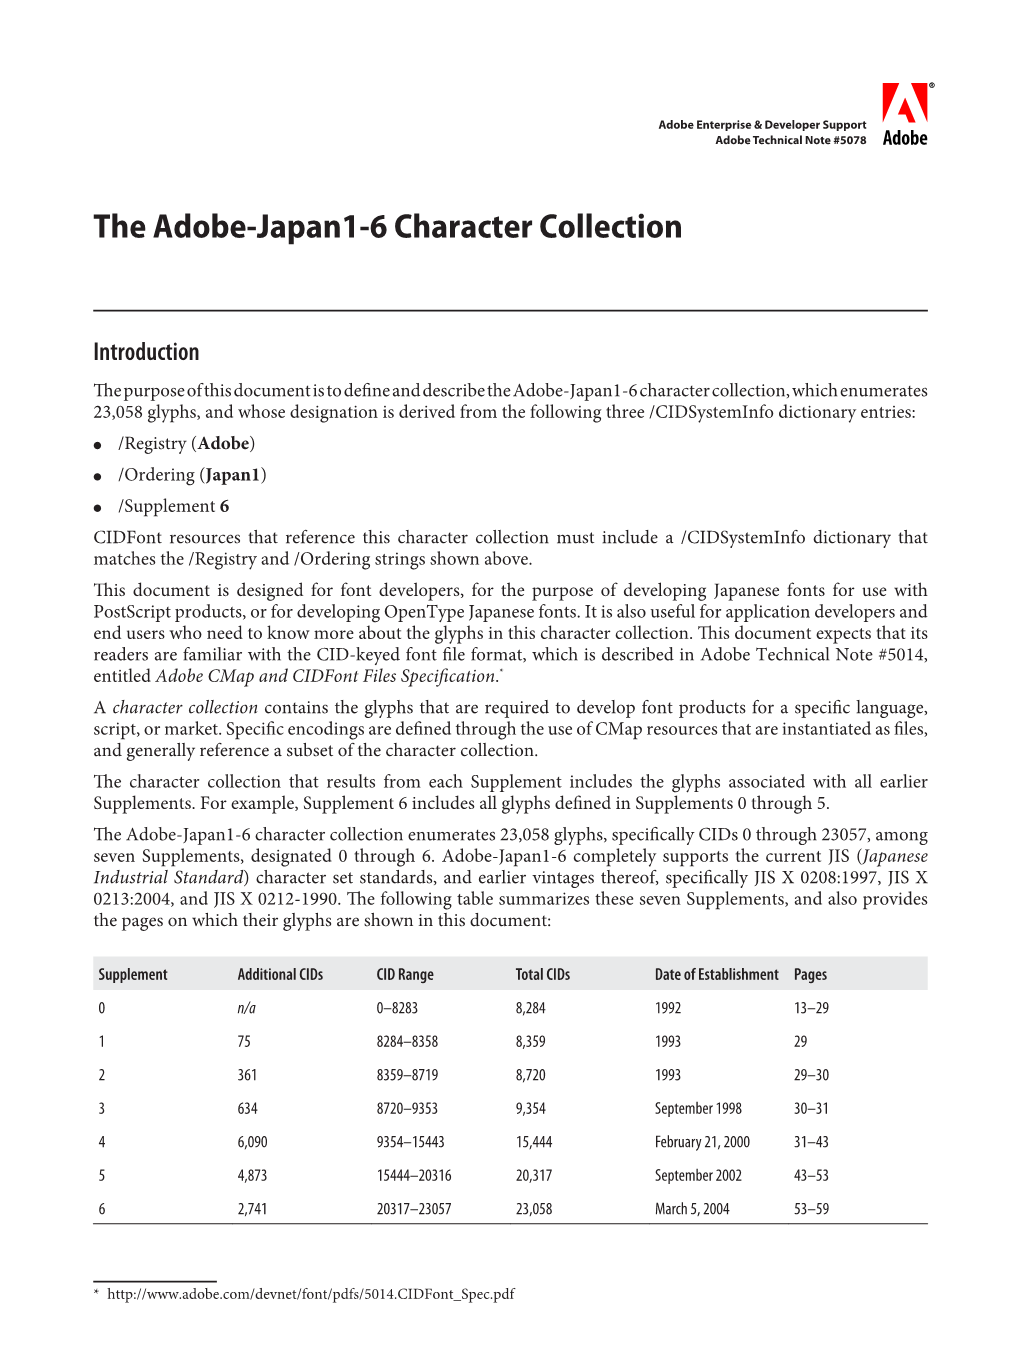 Adobe Technical Note #5078: the Adobe-Japan1-6 Character Collection 2